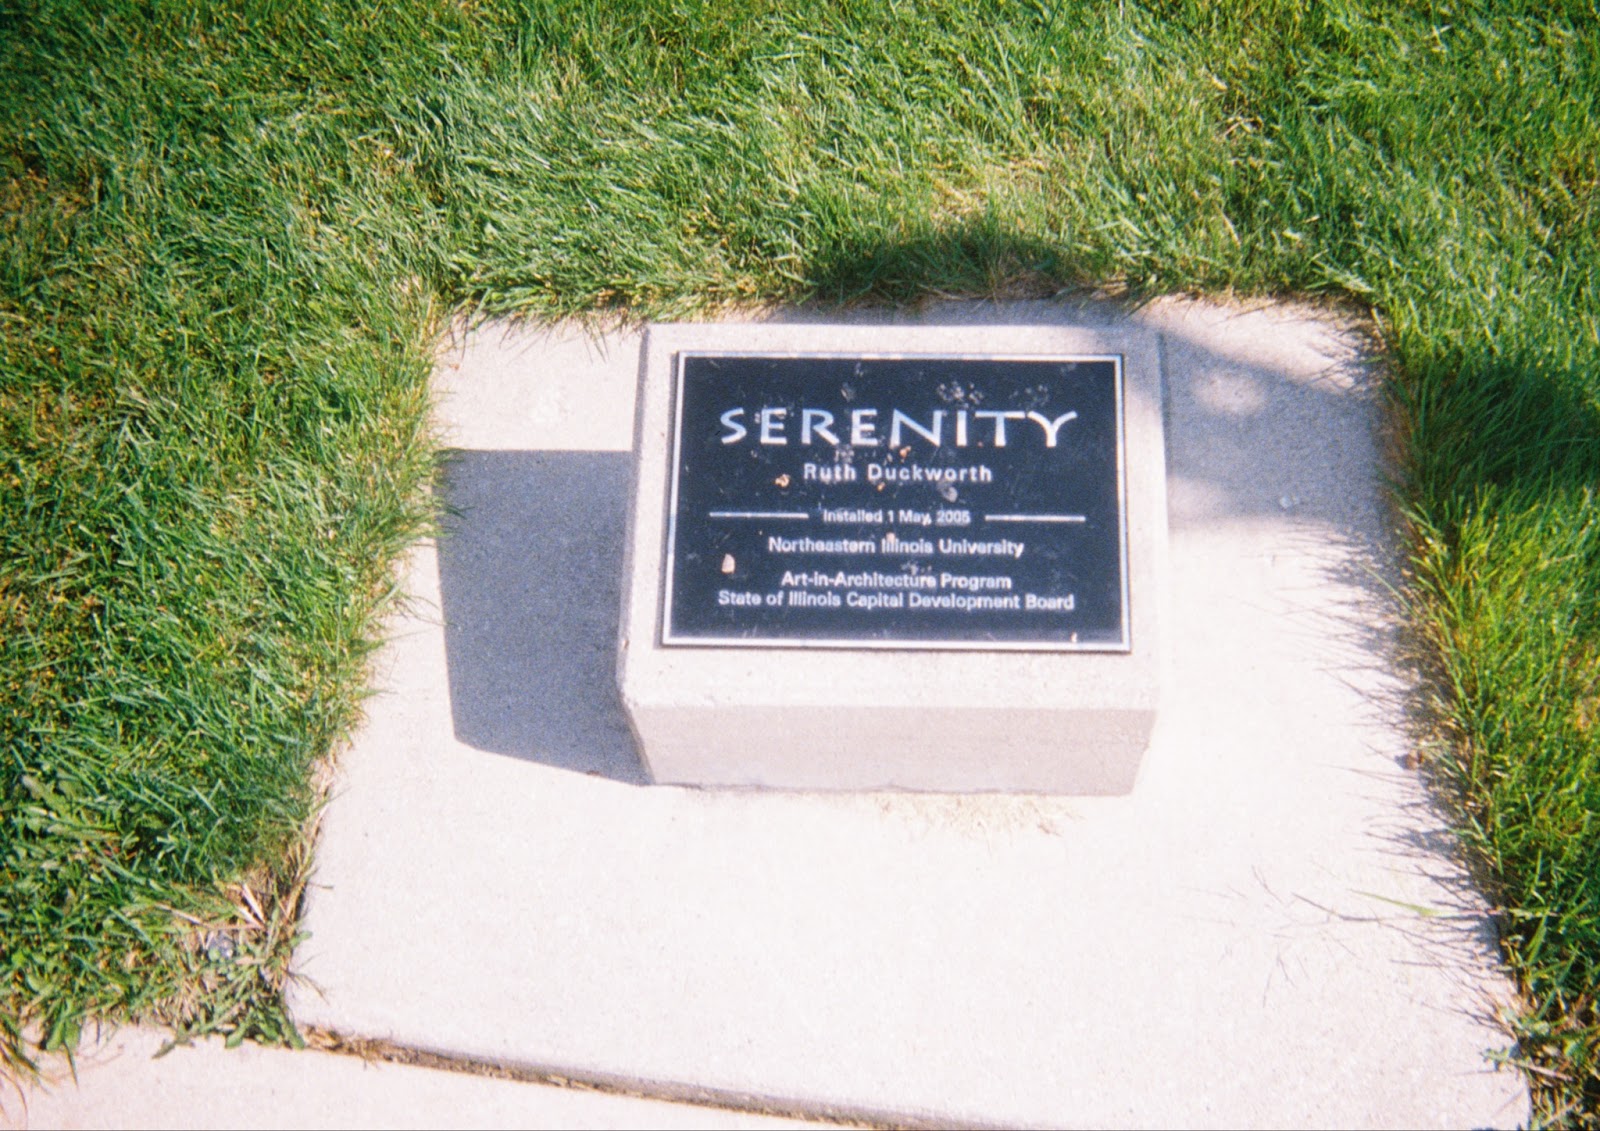  Image: Plaque of Serenity, 2005. Photo by the author.